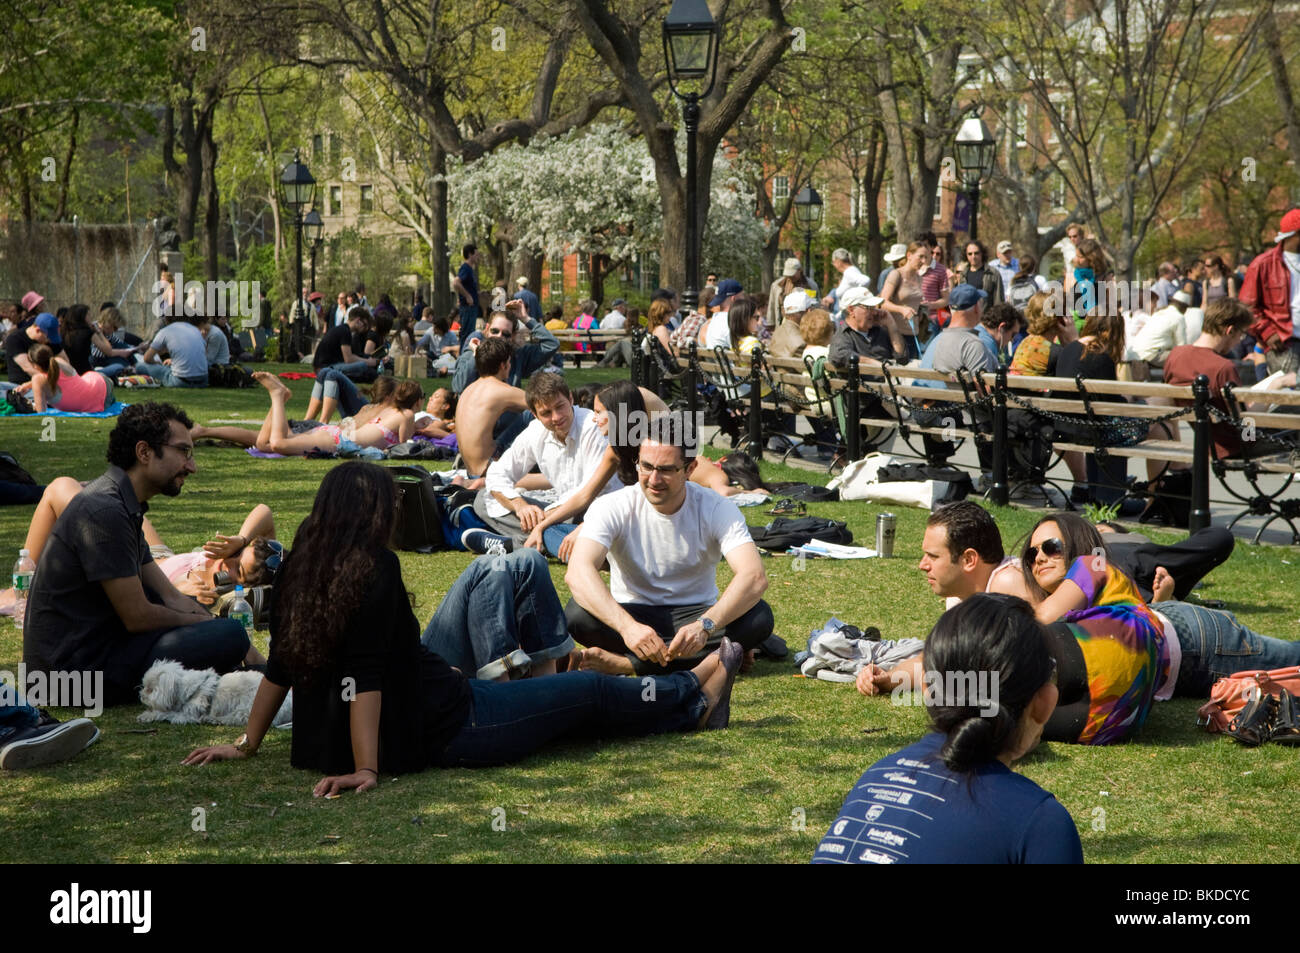 New Yorkers and visitors take advantage of the warm spring weather on a lawn in Washington Square Park in New York Stock Photo